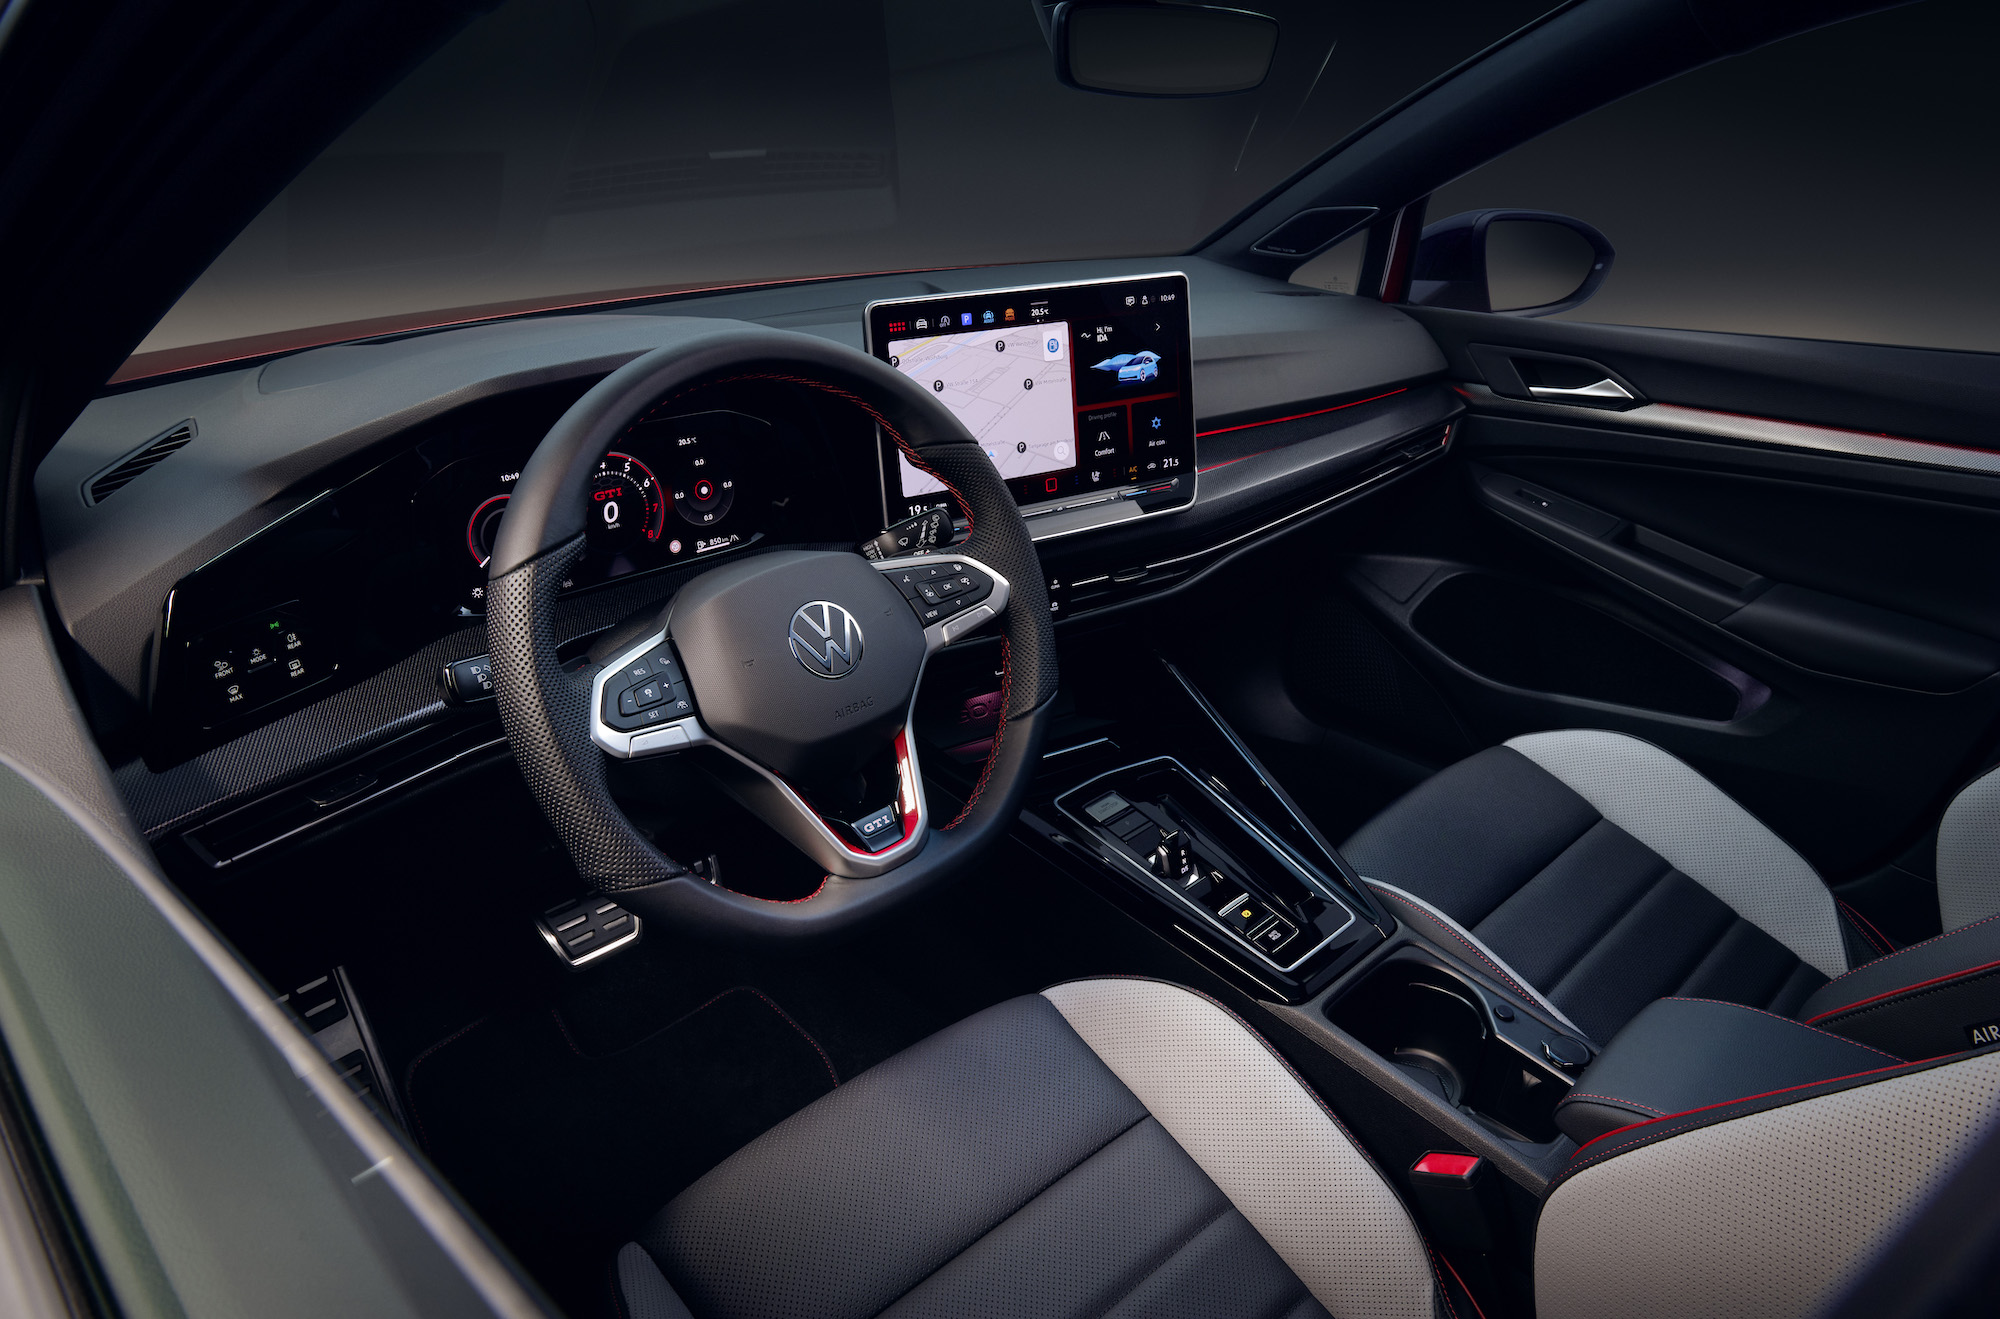 An image showing the interior of a new Volkswagen Gold including the steering wheel and touchscreen.